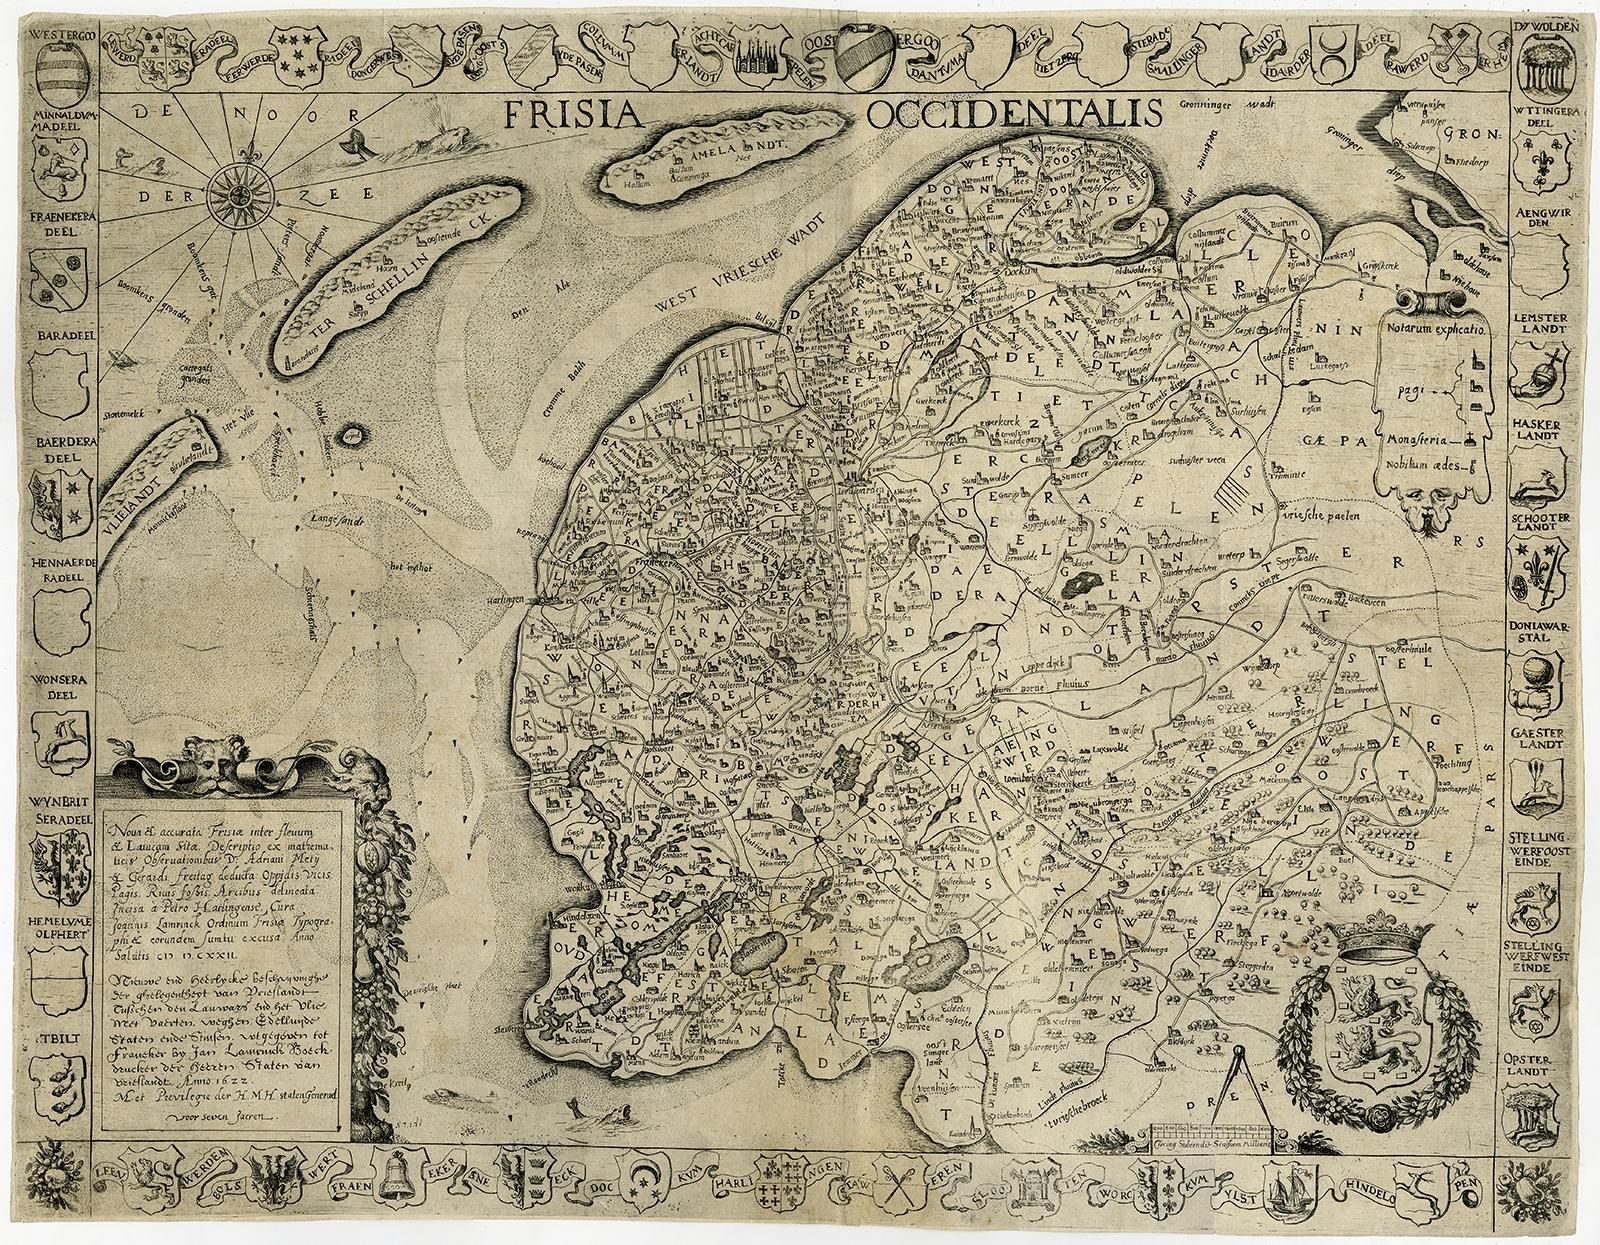 Antique map titled 'Frisia Occidentalis.' - A very decorative map of the Dutch province Friesland, also showing the Wadden islands Terschelling and Ameland. With coats of arms of the municipalities of the area in the borders. A coat of arms in the